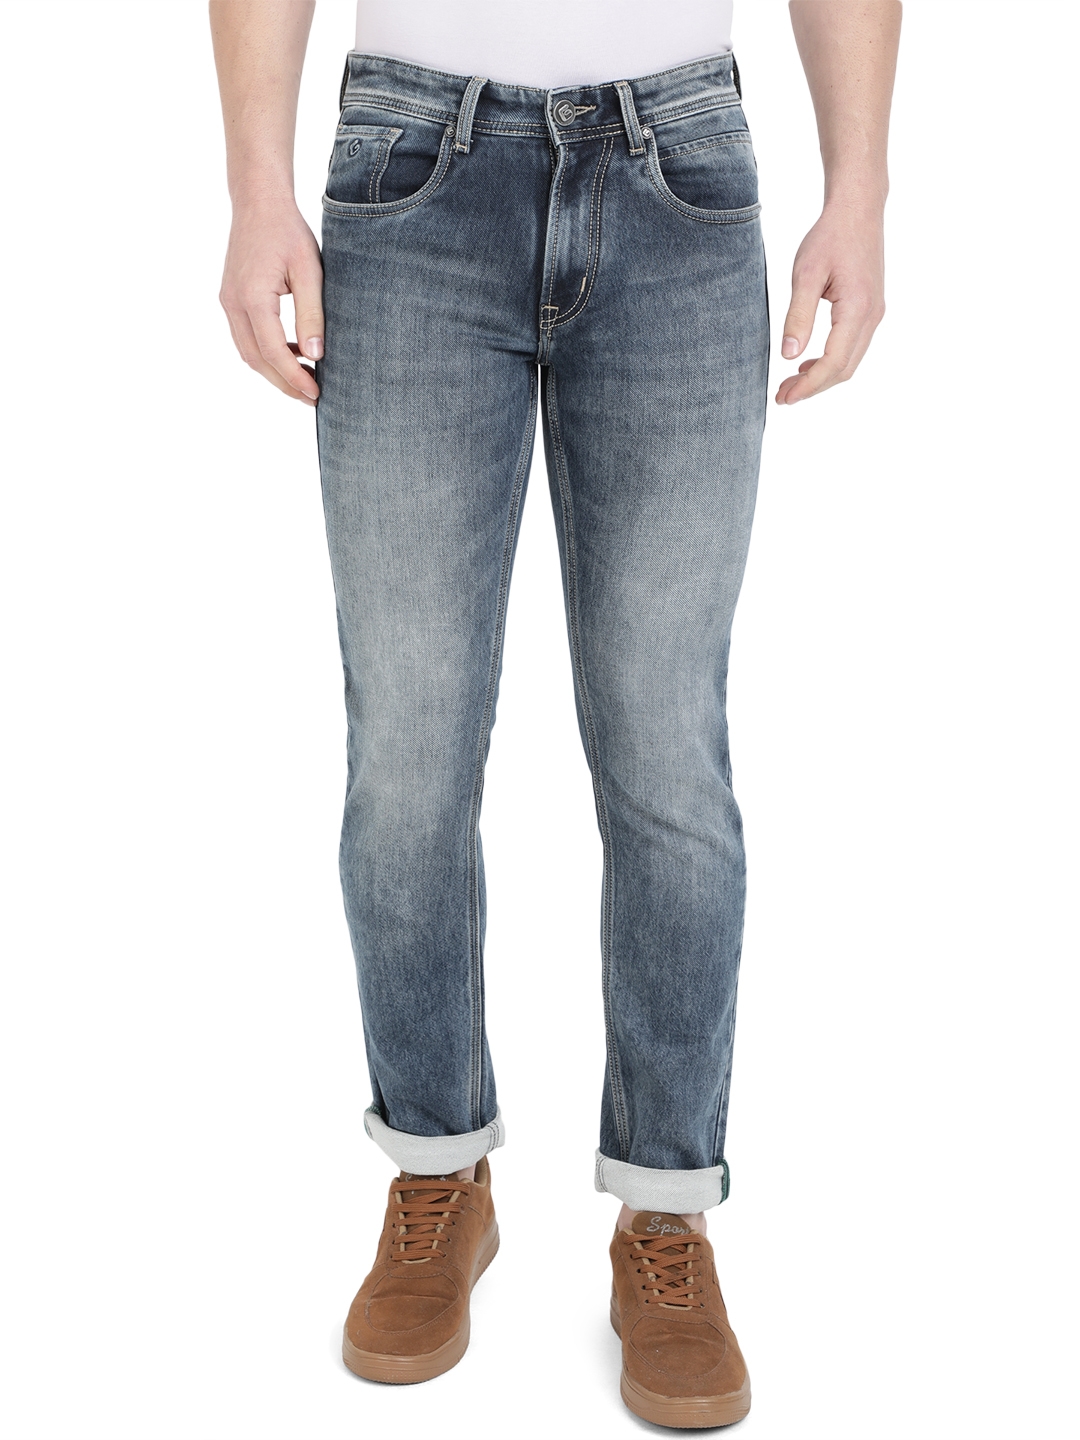 Greenfibre | Denim Blue Washed Narrow Fit Jeans | Greenfibre